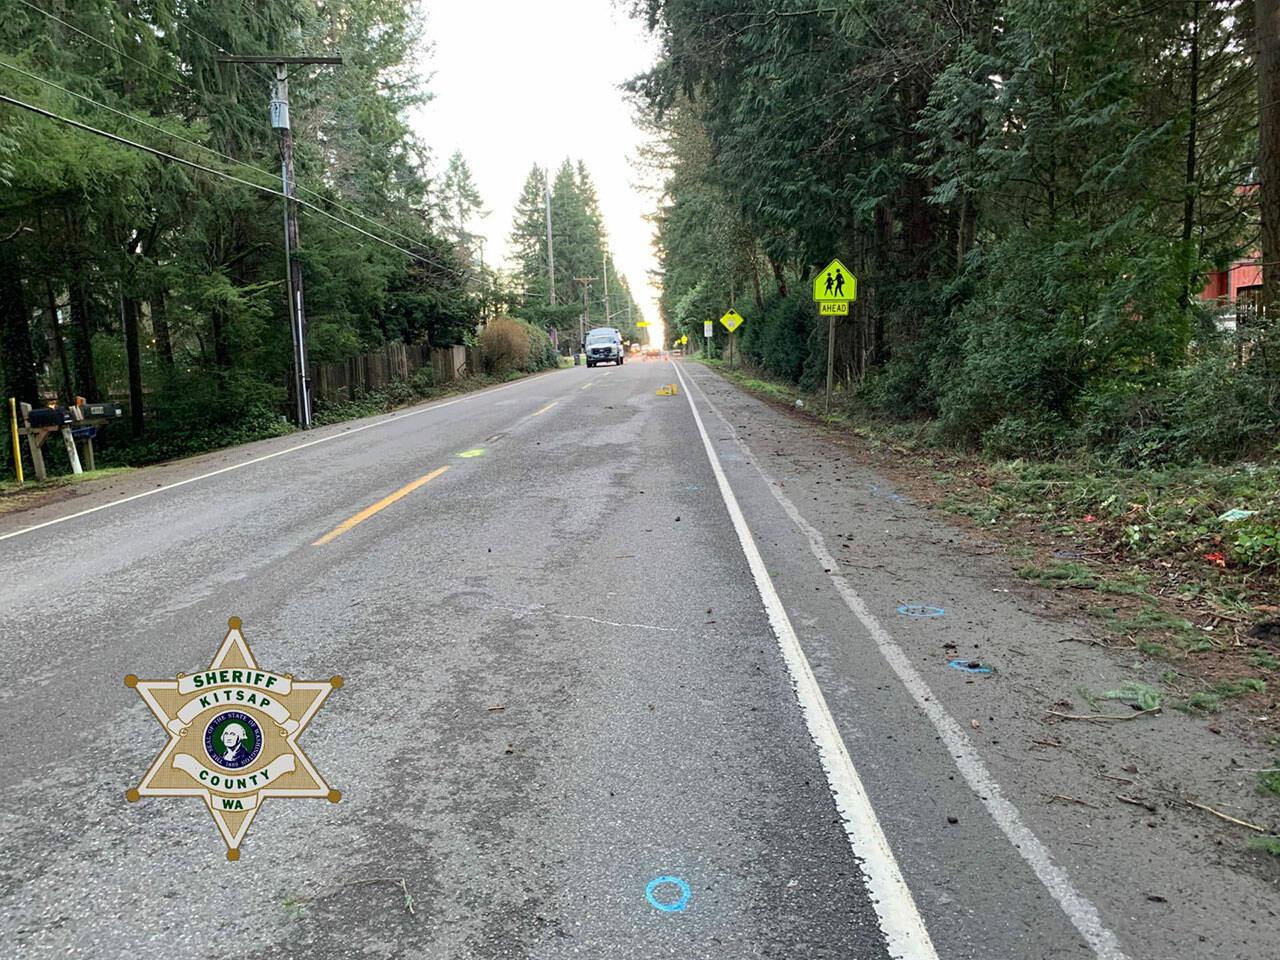 The scene at Central Valley Road where 63-year-old Poulsbo resident John Skubic was killedFriday after a hit and runwhile riding his bike. Courtesy photo